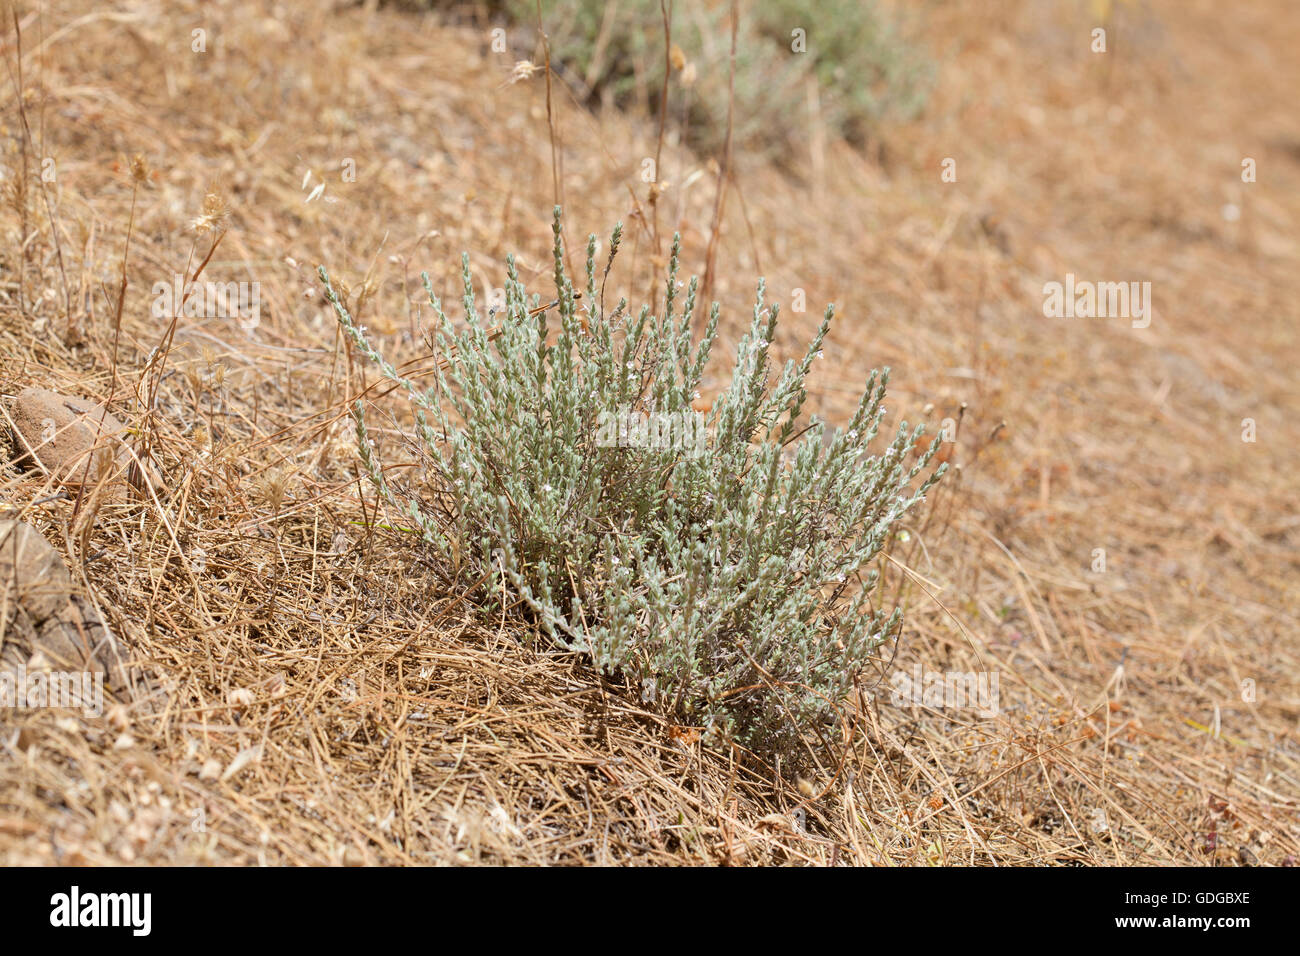 flora of Gran Canaria, flowering micromeria, locally called thyme, growing between pine trees Stock Photo